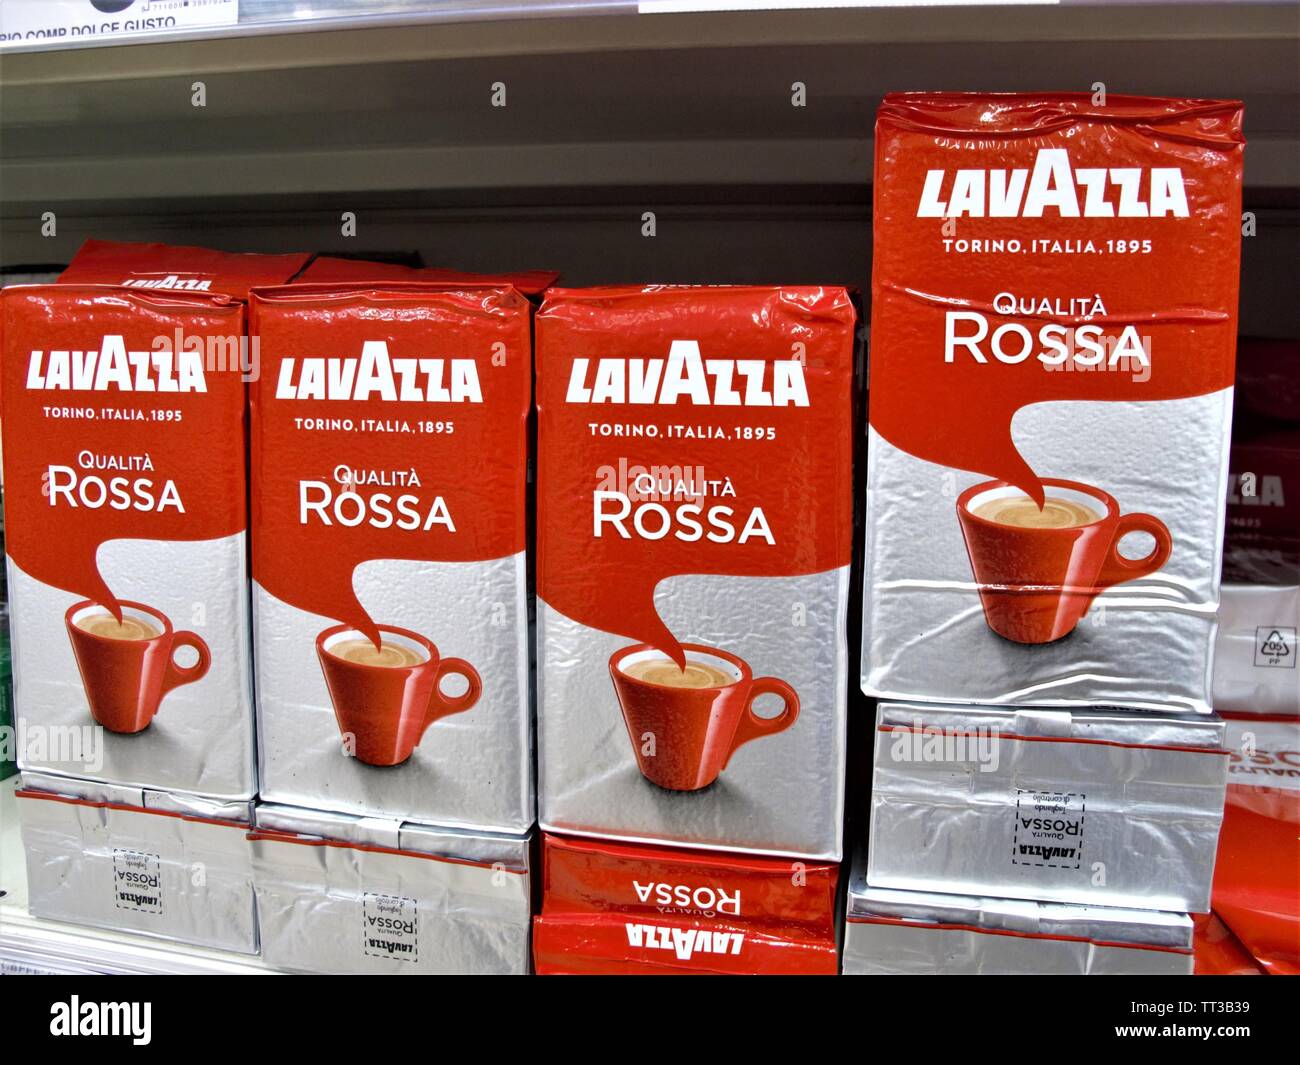 Boxes of Lavazza coffee at the Auchan supermarket in Rome Stock Photo -  Alamy